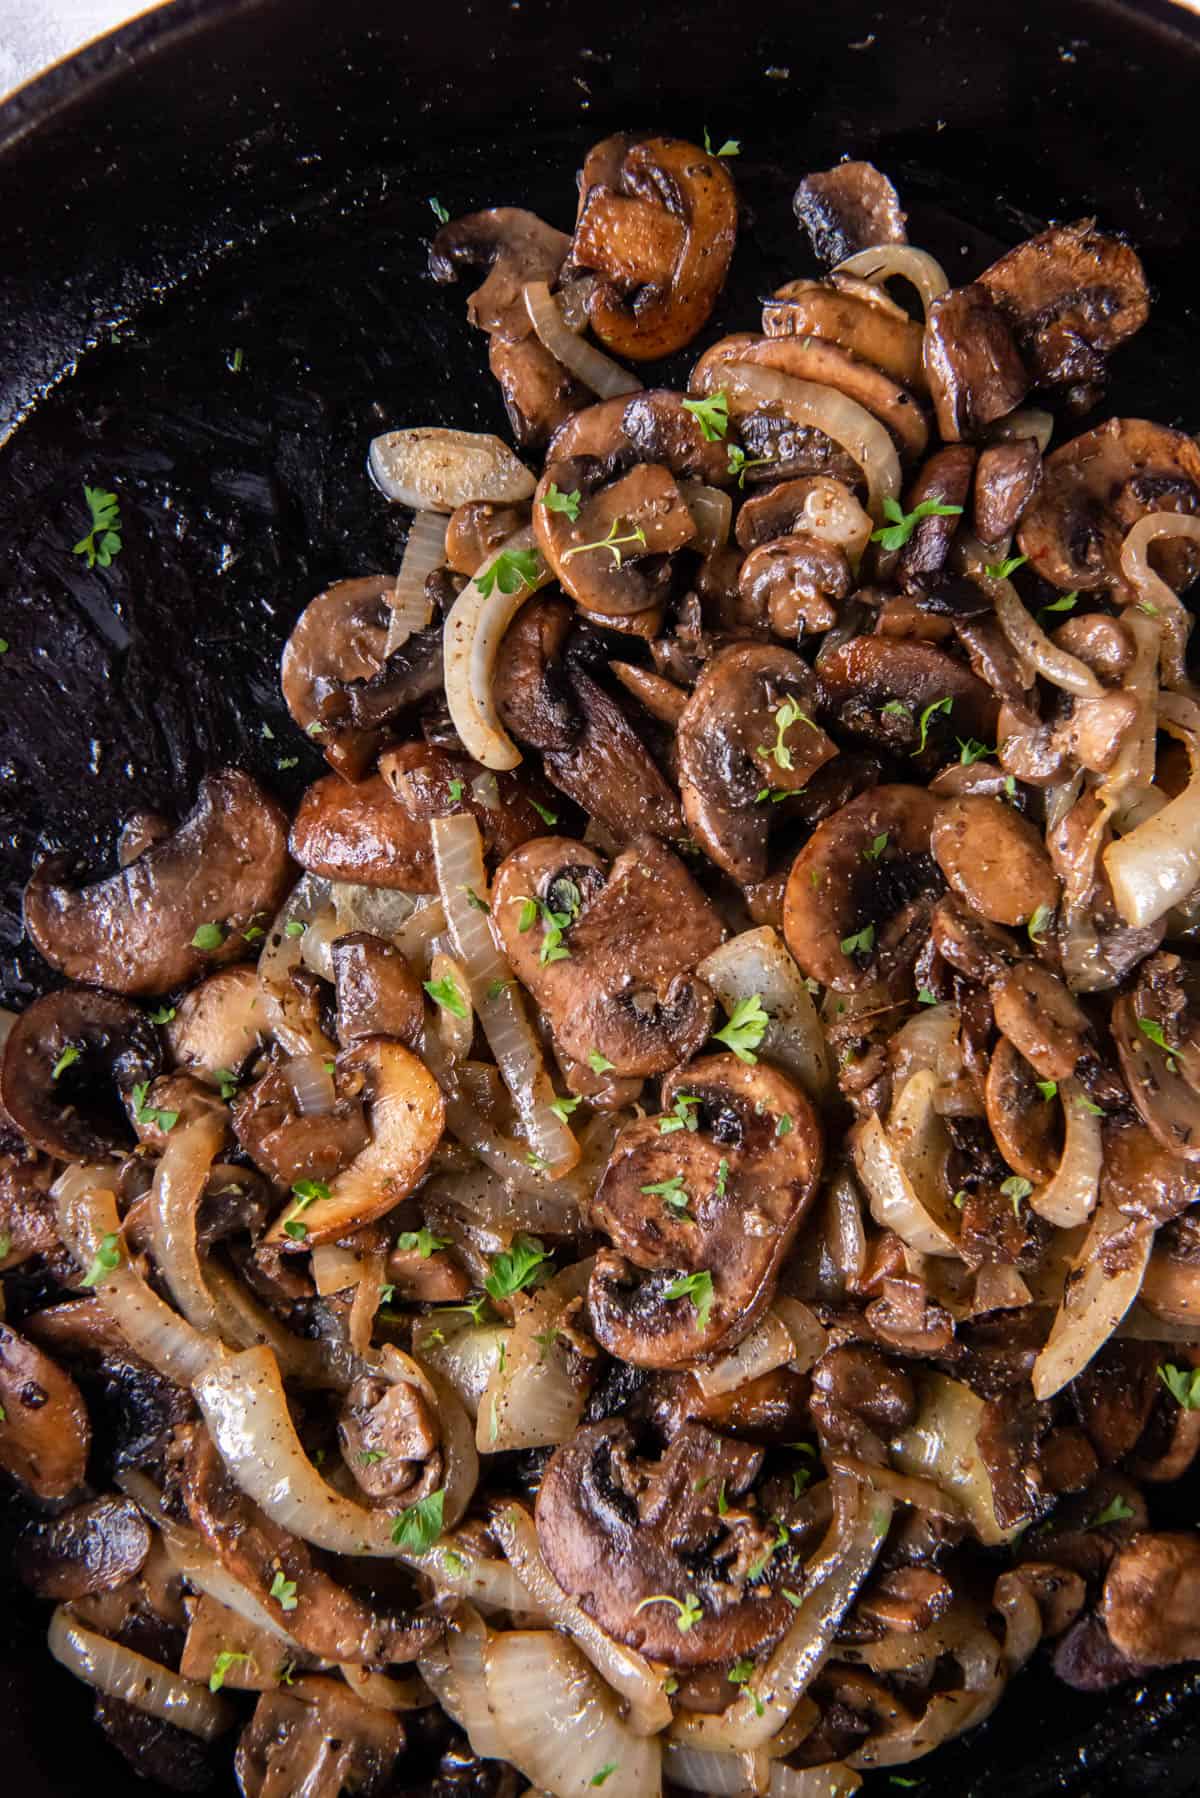 Sauteed mushrooms and onions in a black cast iron skillet after cooking.